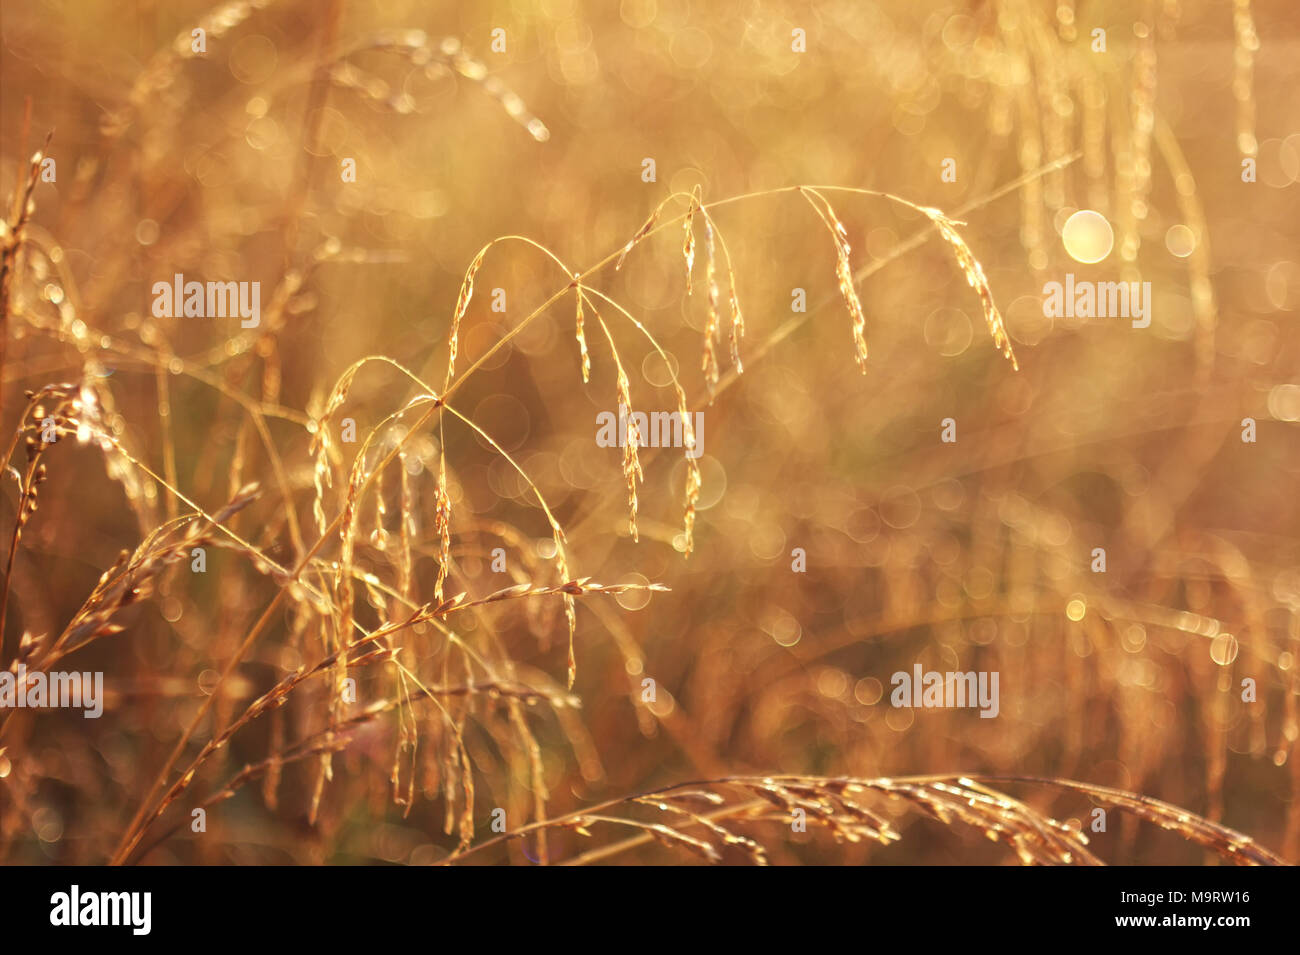 Dry grass fescue (Festuca arundlnacea) at sunset, selective focus on some of the branches Stock Photo